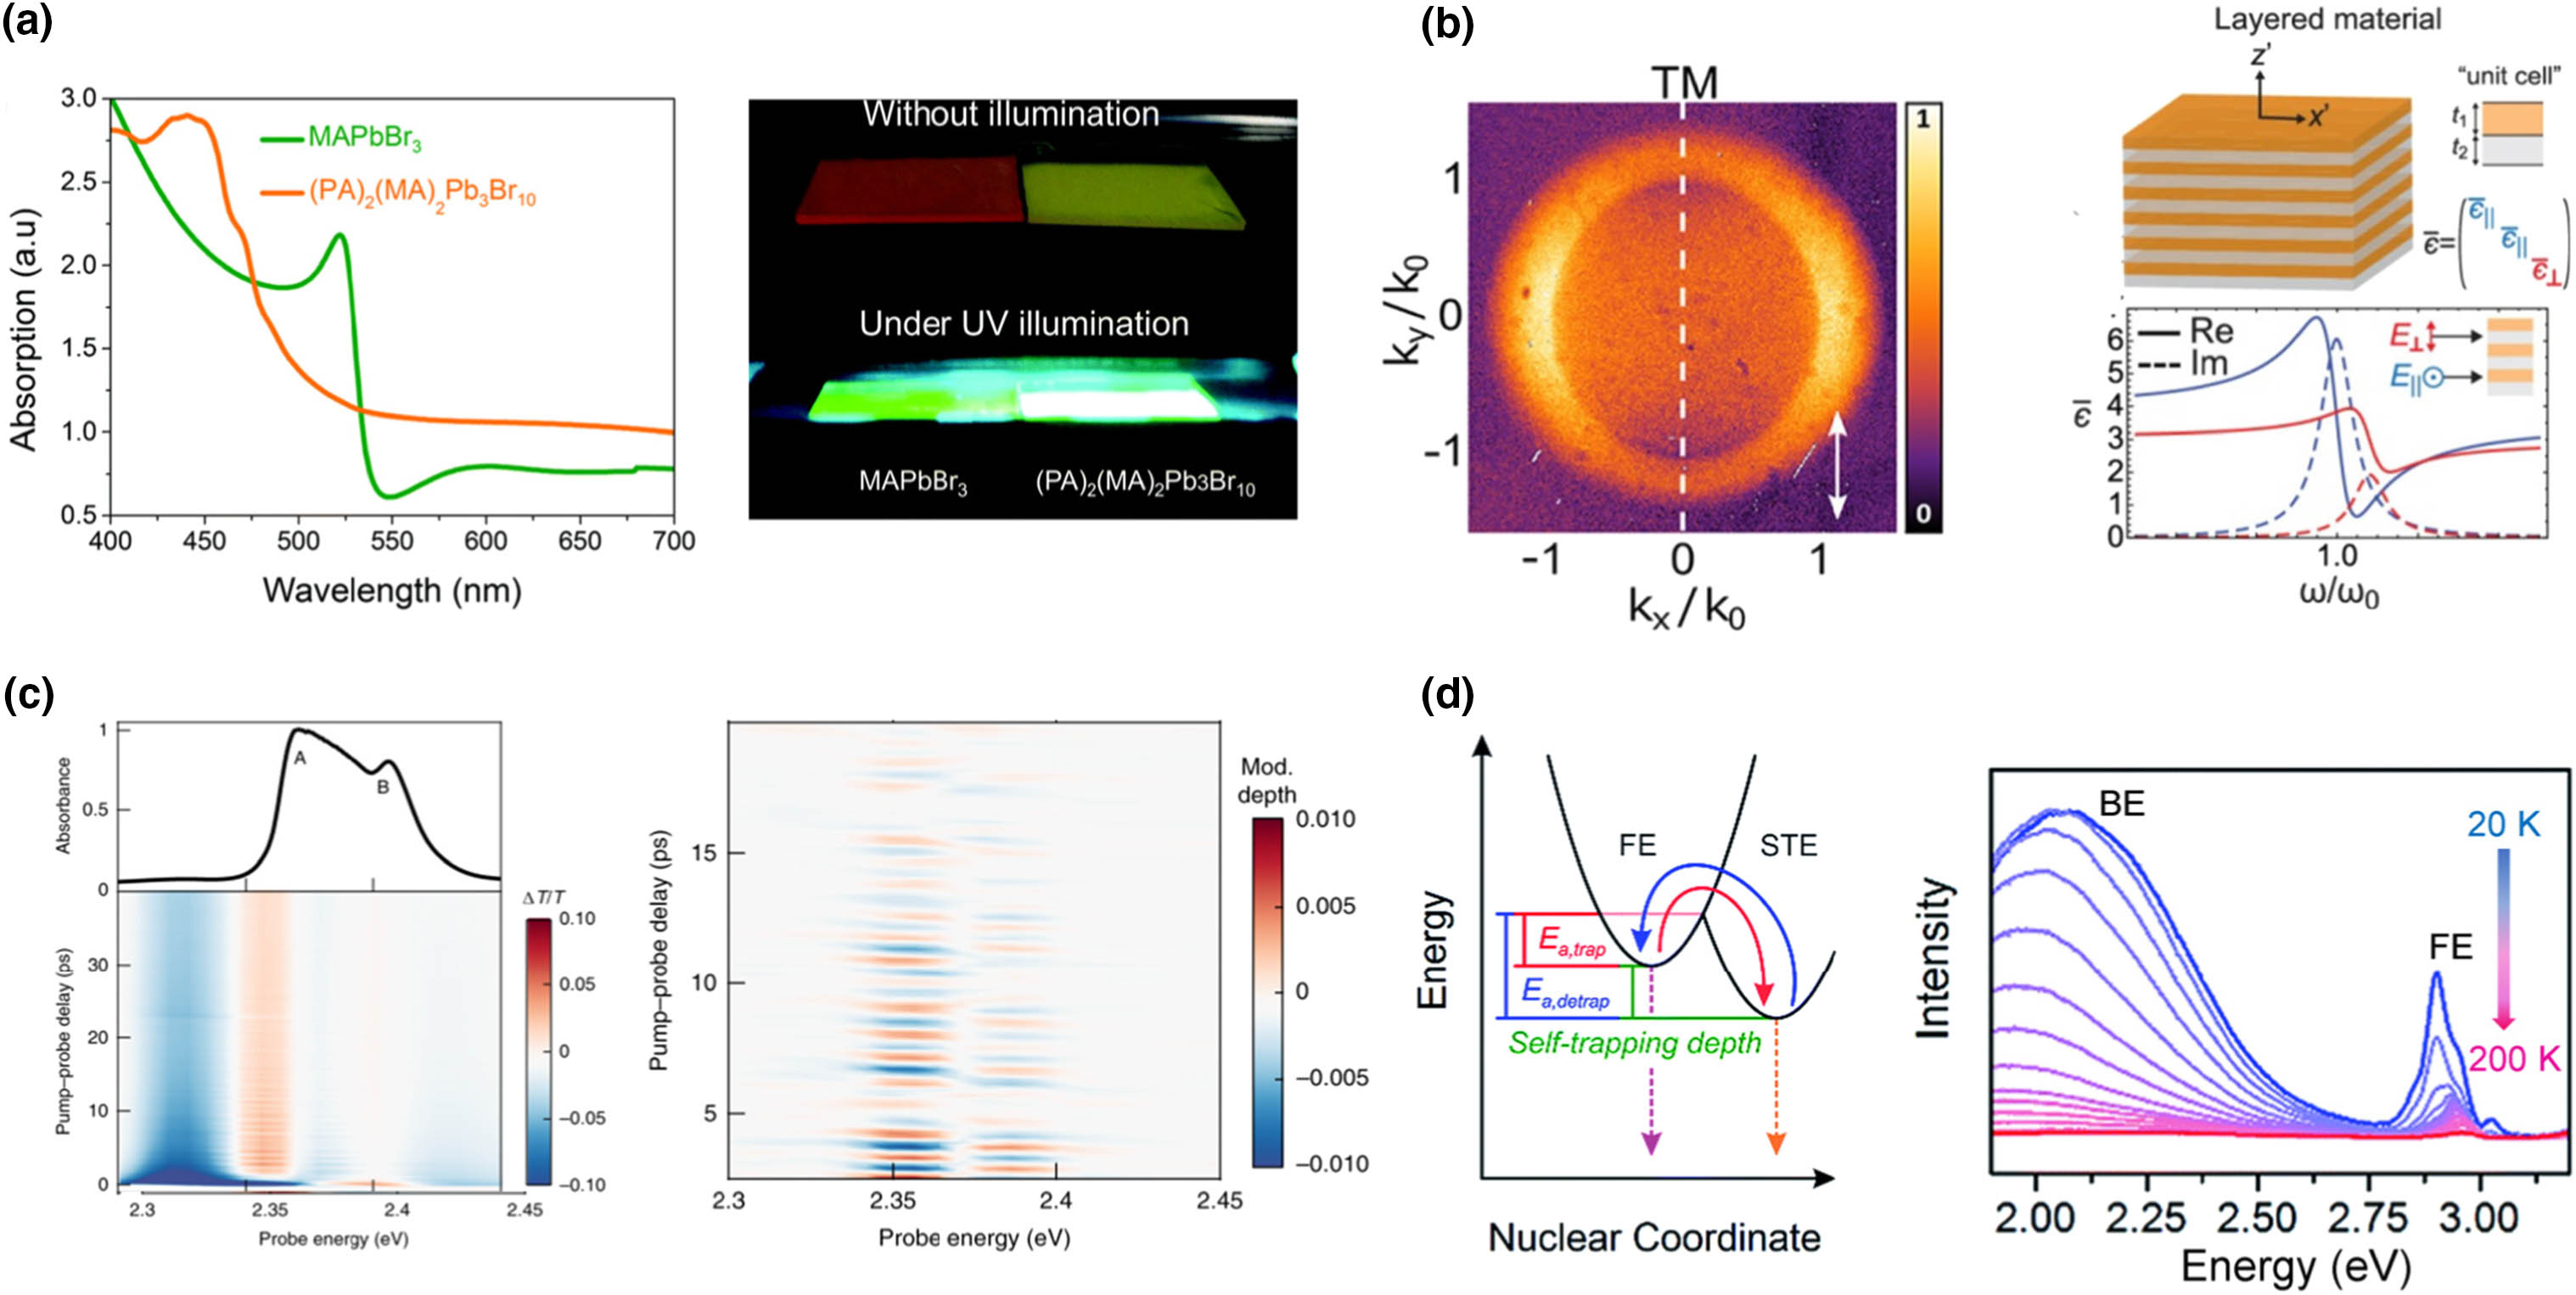 Unique excitonic behaviors of 2D perovskite. (a) Left, absorpation spectra of (PA)2(MA)2Pb3Br10 and MAPbBr3 thin films; right, optical images of the two perovskite thin films under UV illumination. Adapted from [28] with permission from Royal Society of Chemistry. (b) In-plane and out-of-plane exciton of 2D perovskite. Left, 2D Fourier image of PL in the vertical polarization (white arrow), in which out-of-plane component locates at the TIR angle (k0). Adapted with permission from [33]. Copyright 2018, American Chemical Society. Right, dielectric model of 2D perovskite indicating the in-plane and out-of-plane electric field. Adapted with permission from [34]. Copyright 2019, American Chemical Society. (c) Phonon coherence of (PEA)2PbI4. Left, absorpation and time-resolved differential transmission spectrum at 5 K; right, oscillatory components extracted from the time-resolved differential transmission spectrum indicating the coherent vibrational dynamics. Adapted with permission from [40]. Copyright 2019, Springer Nature. (d) Energy diagram showing the generation of free exciton and self-trapped exciton due to the lattice reorganization; the resulting emission spectra behave as sharp excitonic emission and broad exciton self-trapping emission at low temperature. Adapted from [43]. Published by the Royal Society of Chemistry.